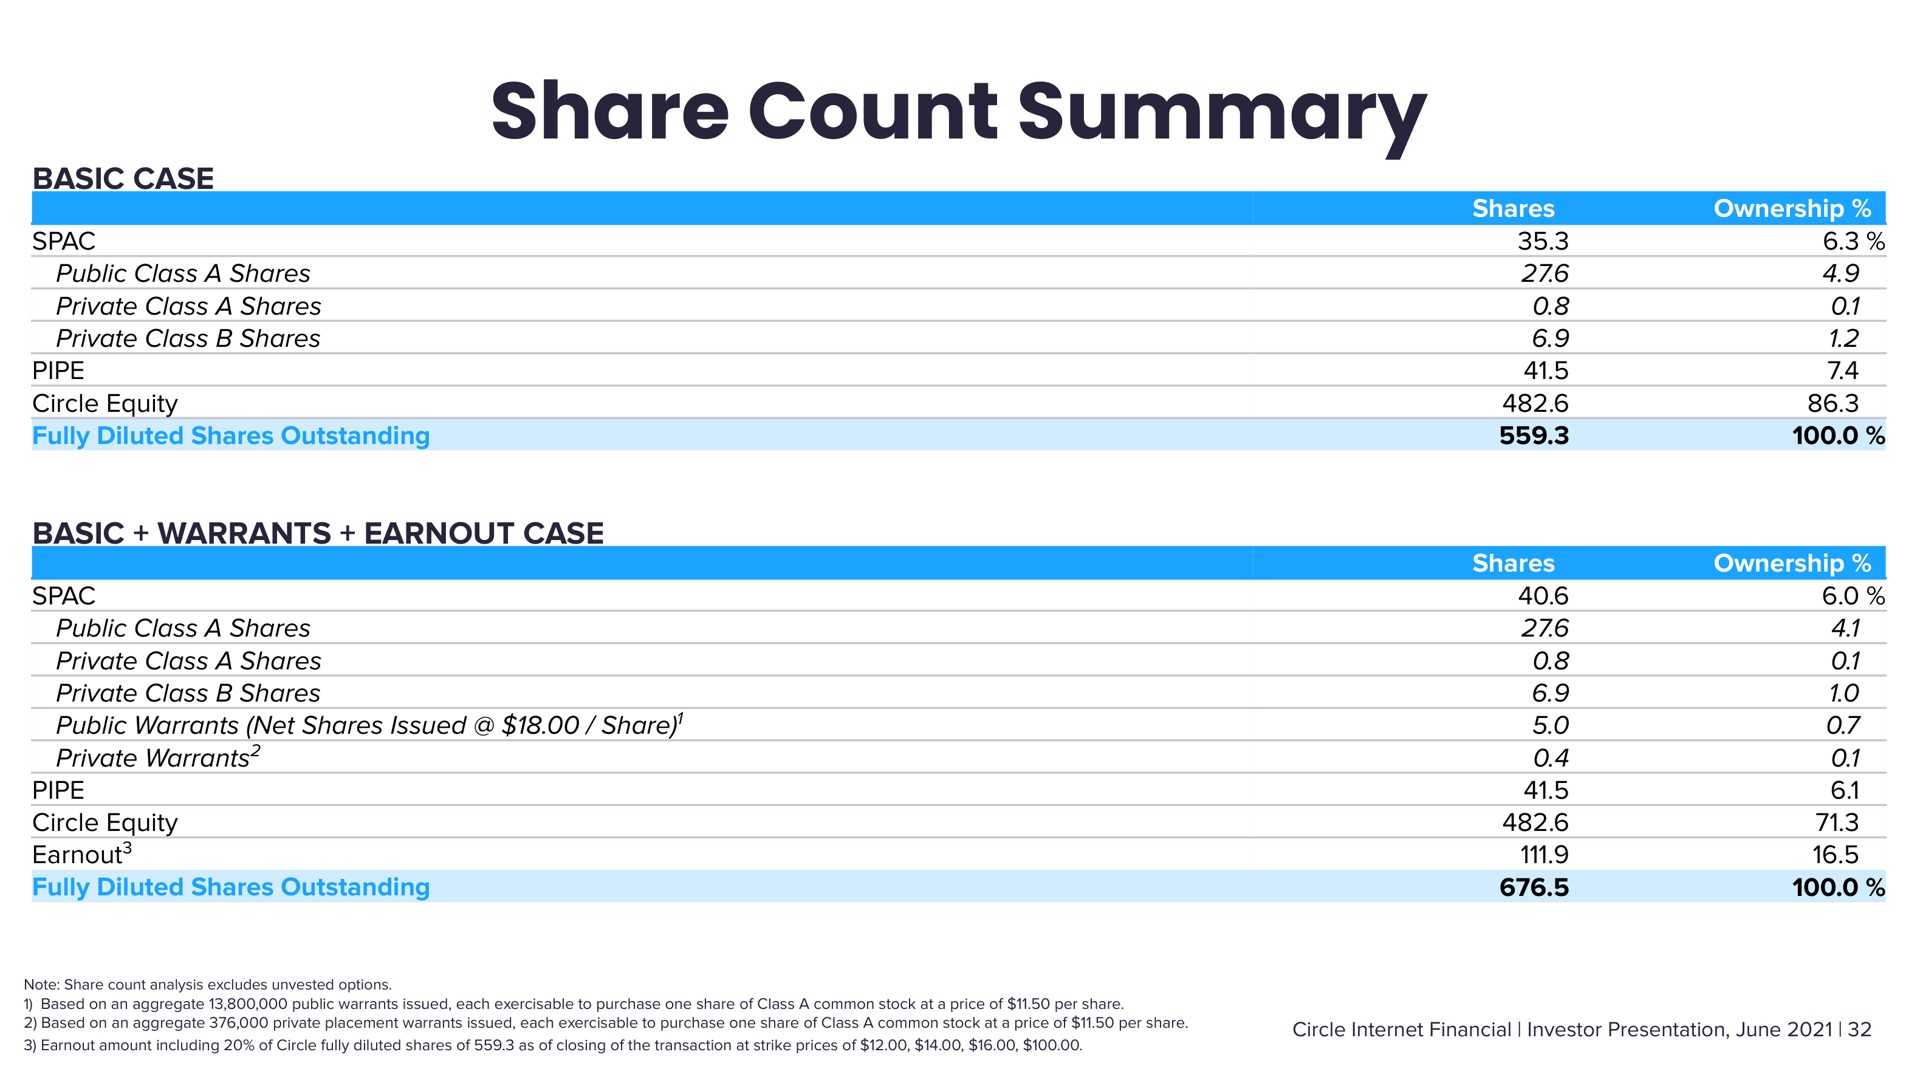 share count summary | Circle